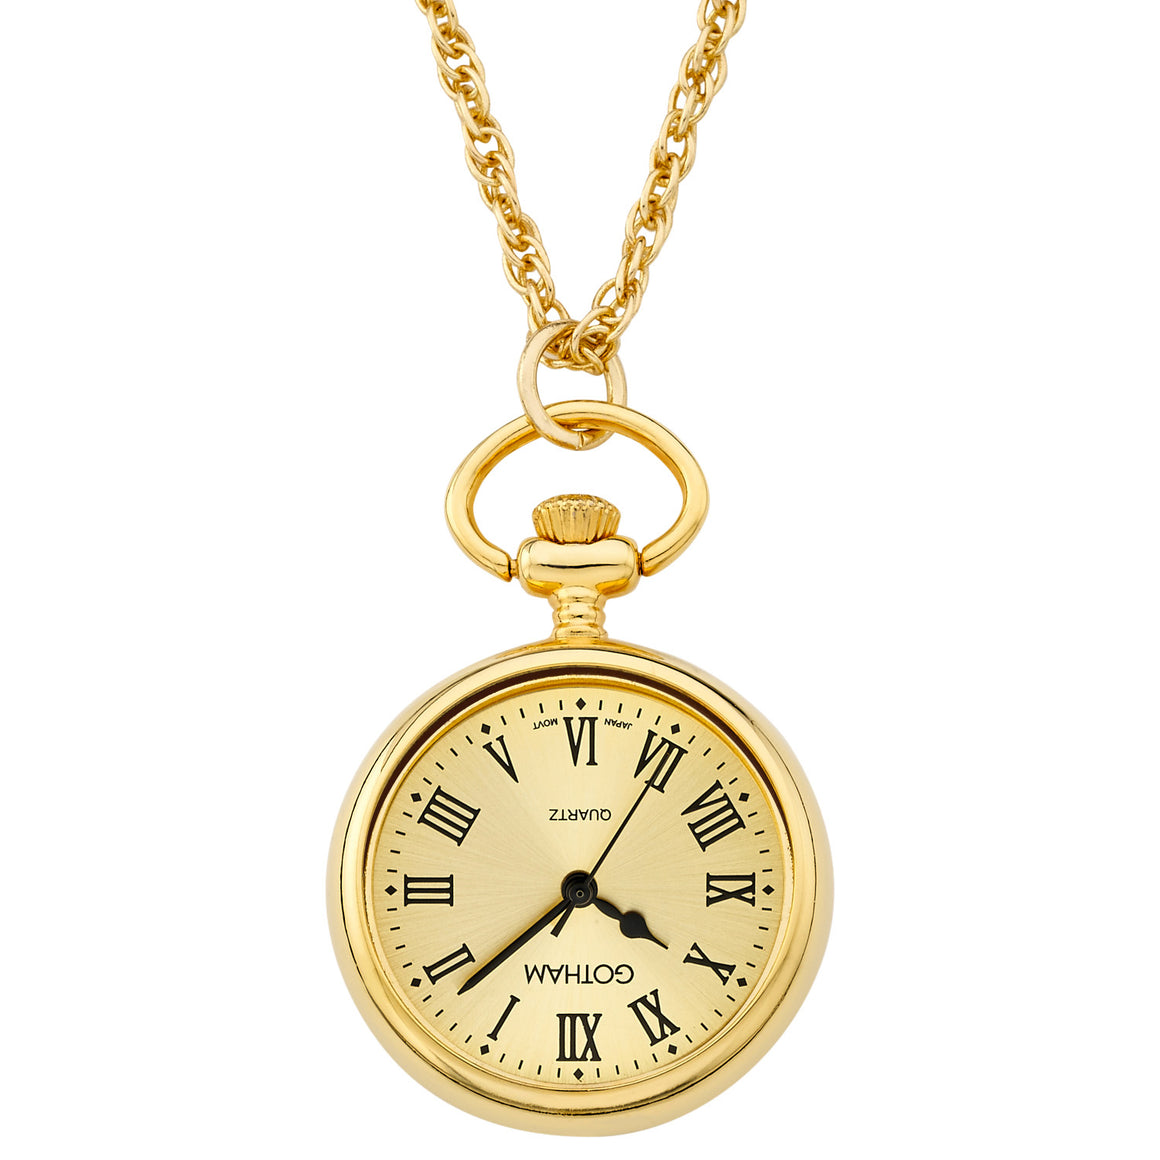 Gotham Women's Gold-Tone Open Face Pendant Watch With Chain # GWC14134GR